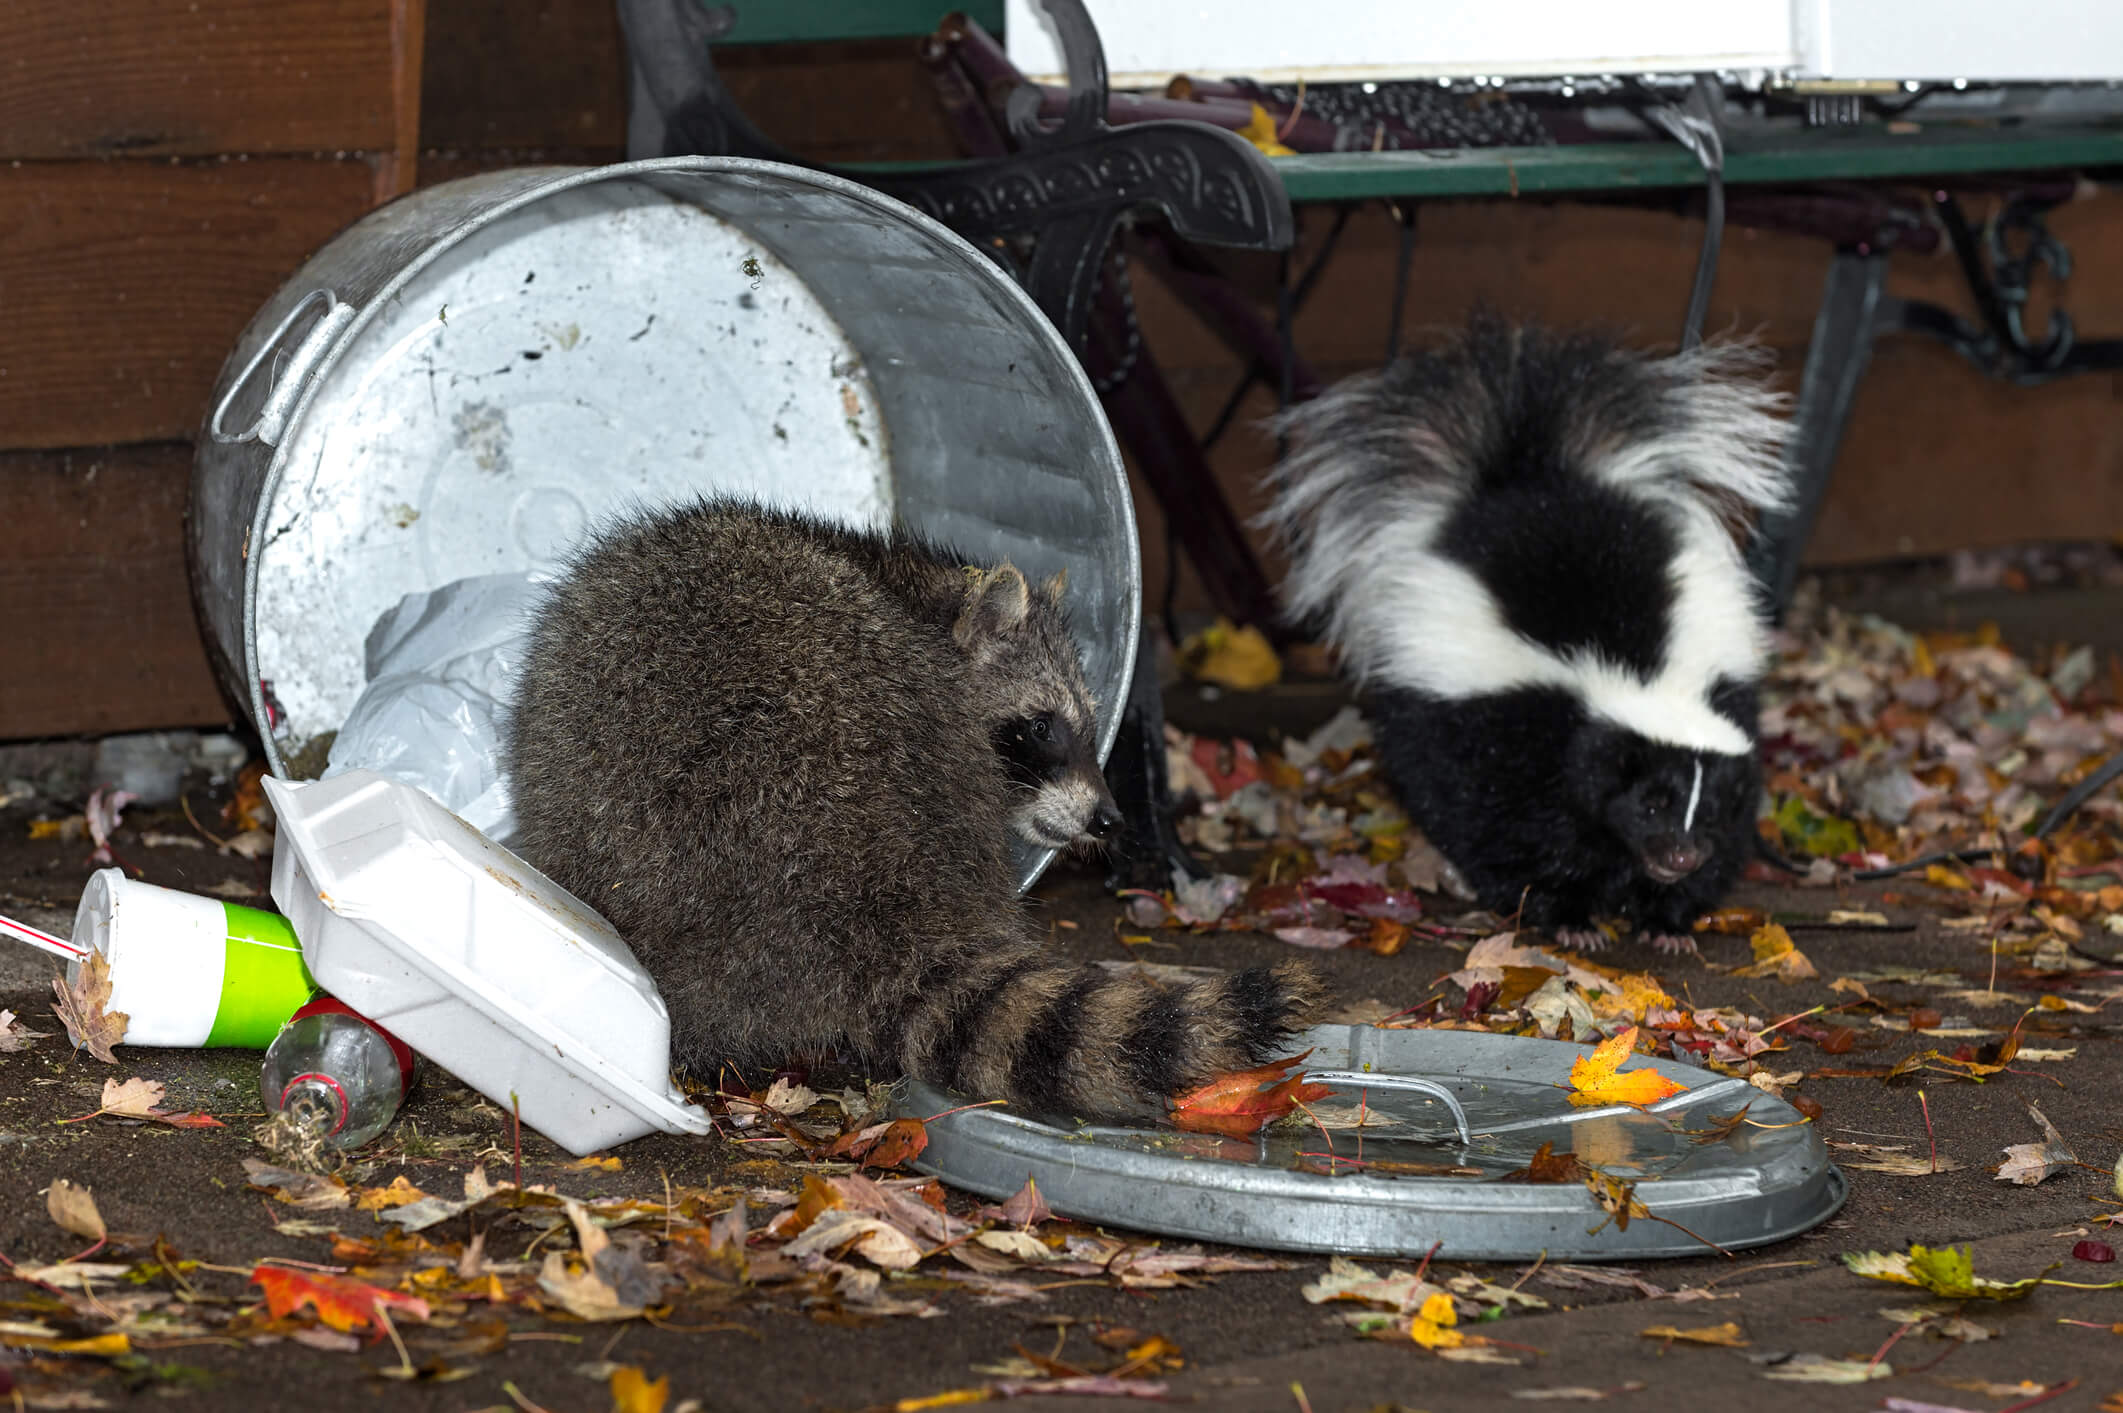 The Tell-Tale Signs of Raccoons Toppled Garbage Cans